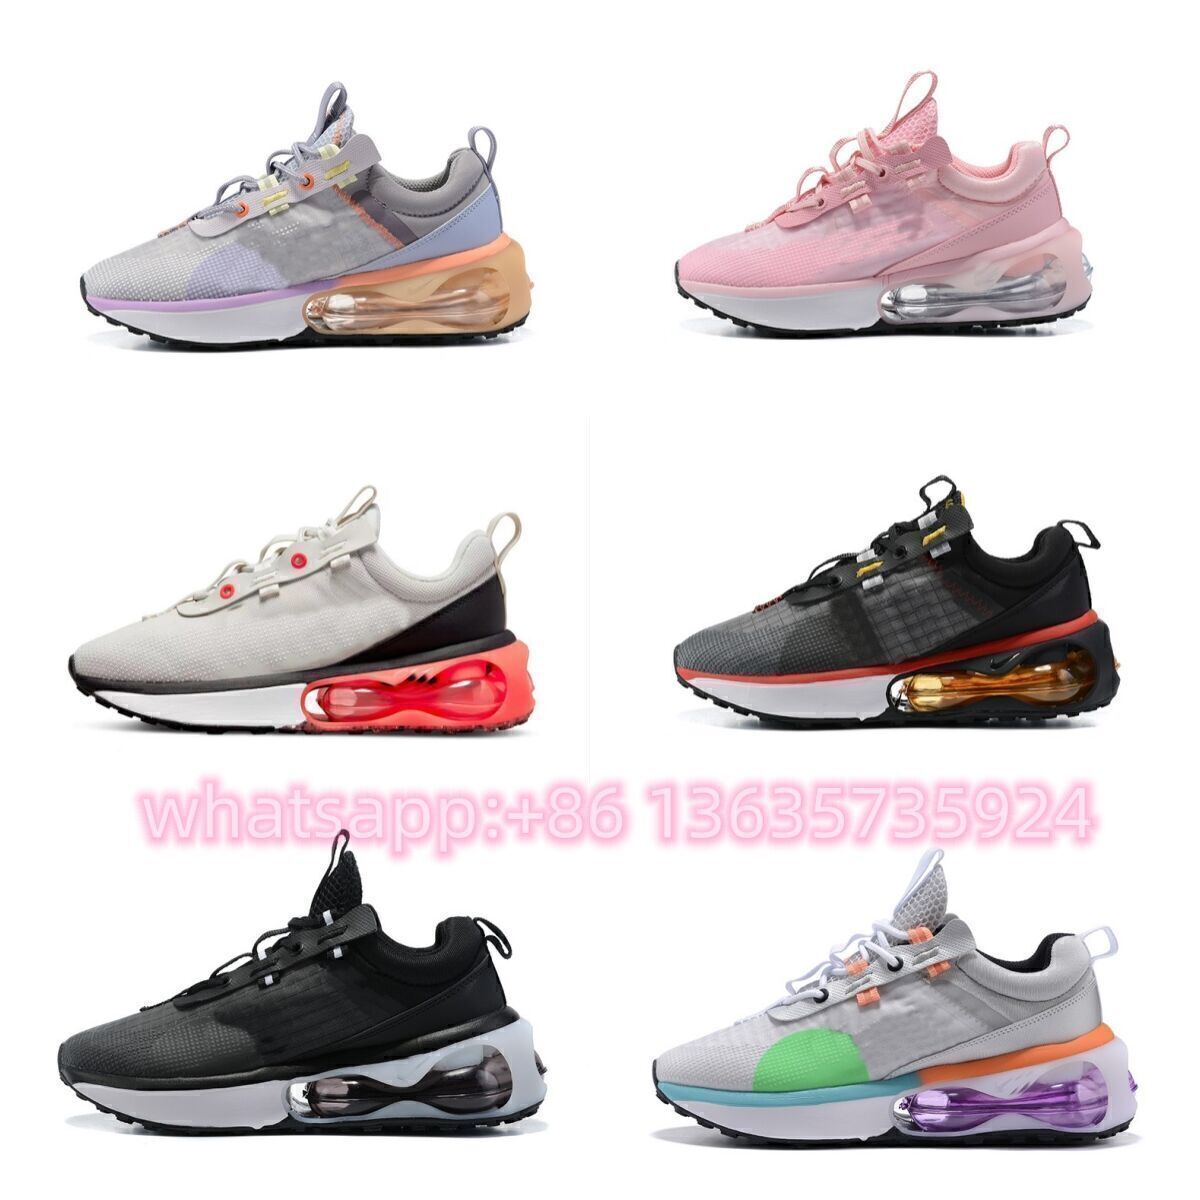 Wholesale Replicas Shoes Professional Brand Sneaker Yupoo Shoes